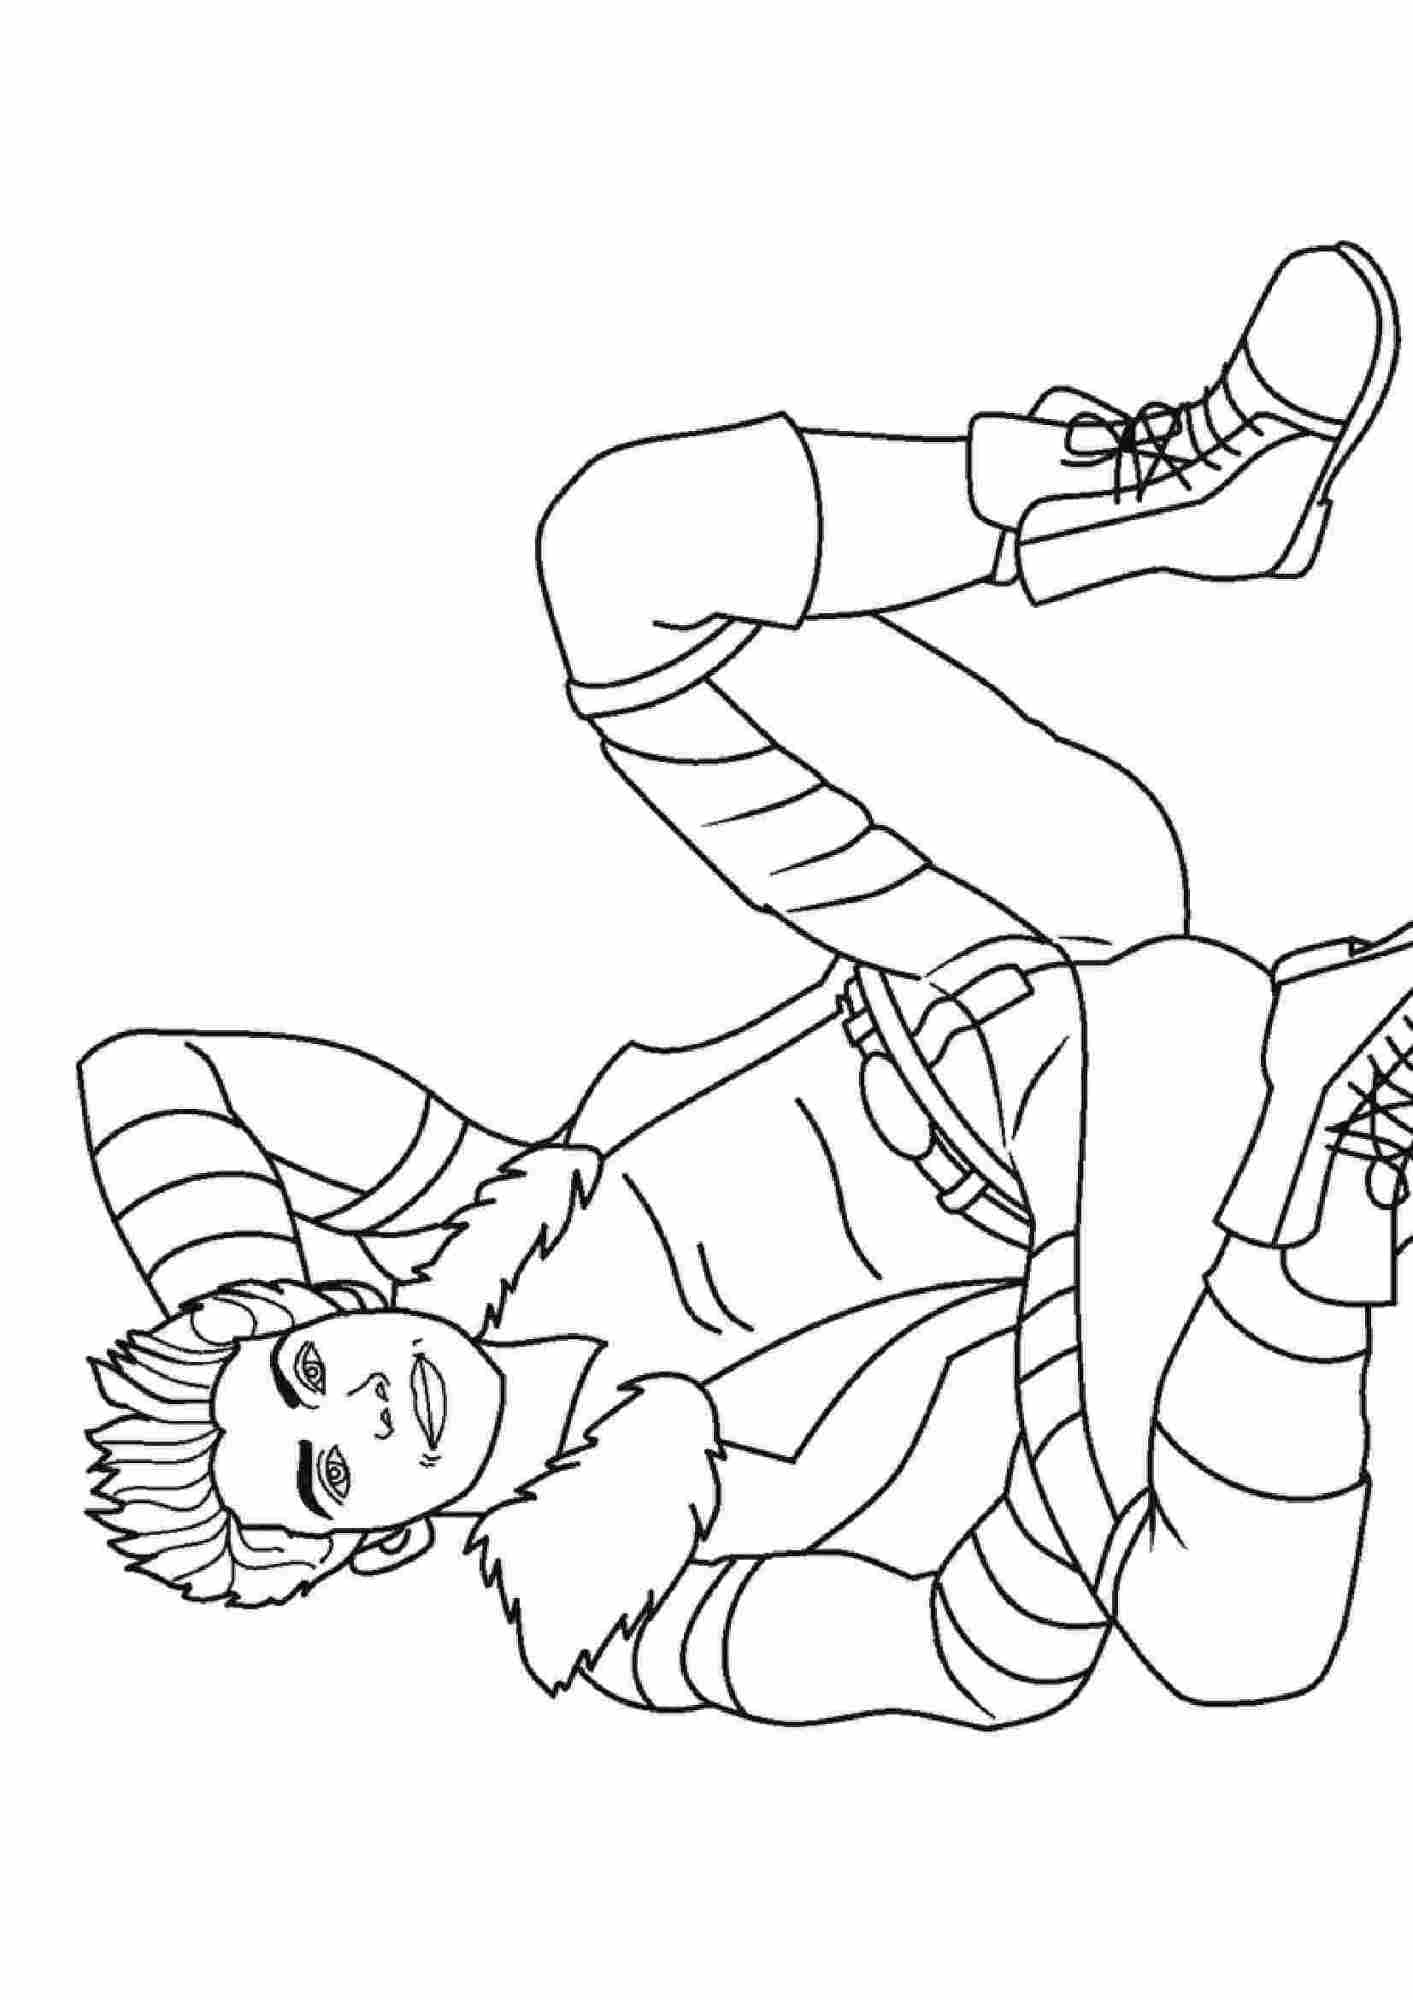 Carlos teenager relaxes from Descendant Coloring Pages